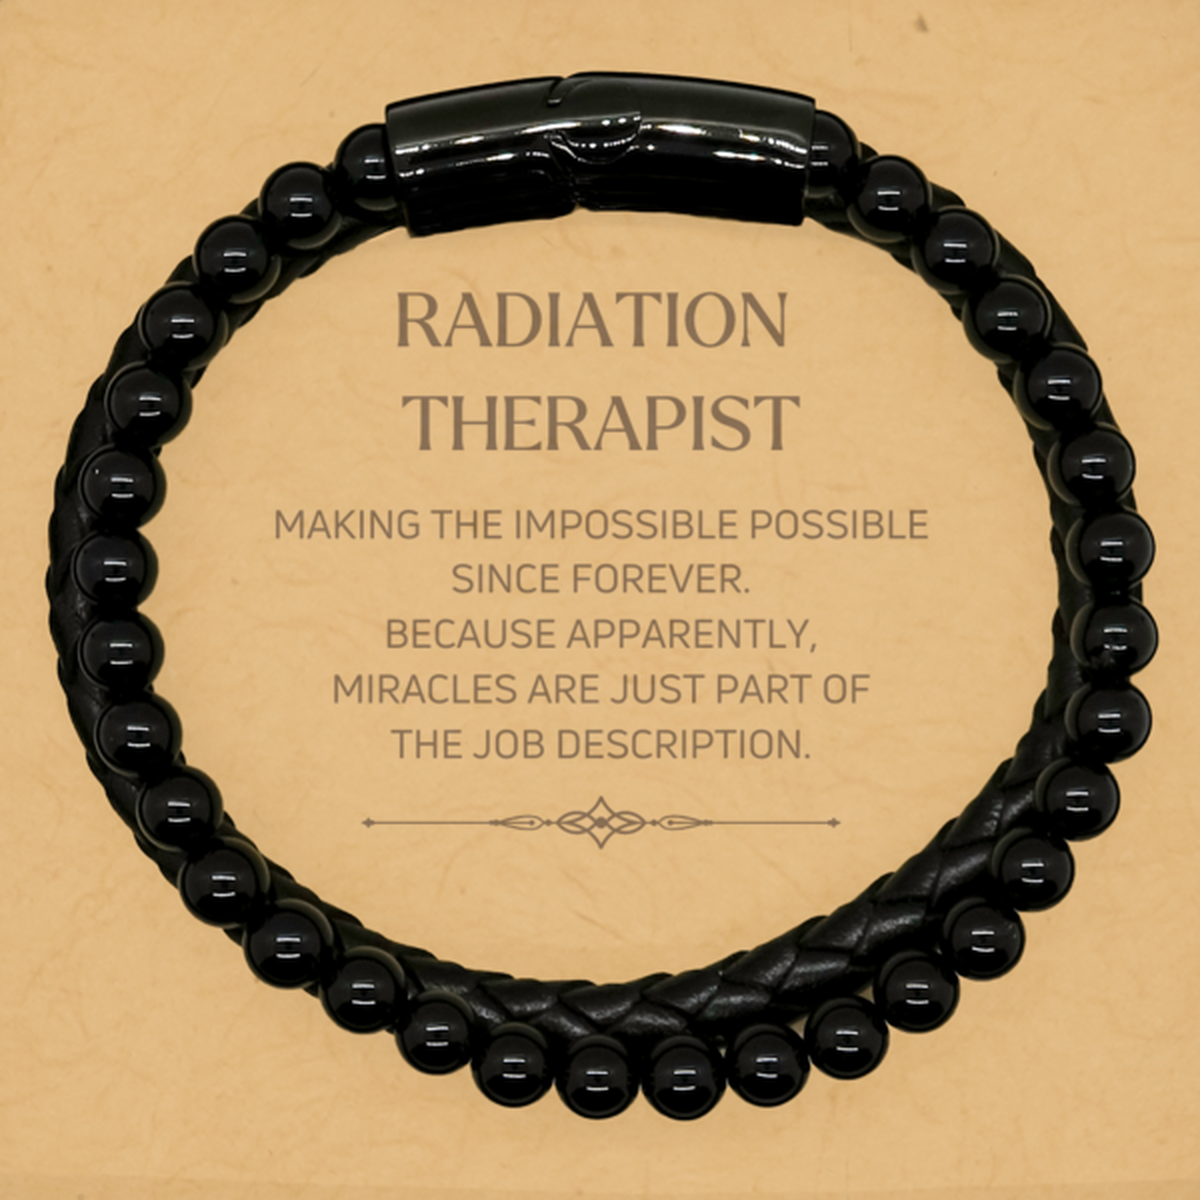 Funny Radiation Therapist Gifts, Miracles are just part of the job description, Inspirational Birthday Stone Leather Bracelets For Radiation Therapist, Men, Women, Coworkers, Friends, Boss